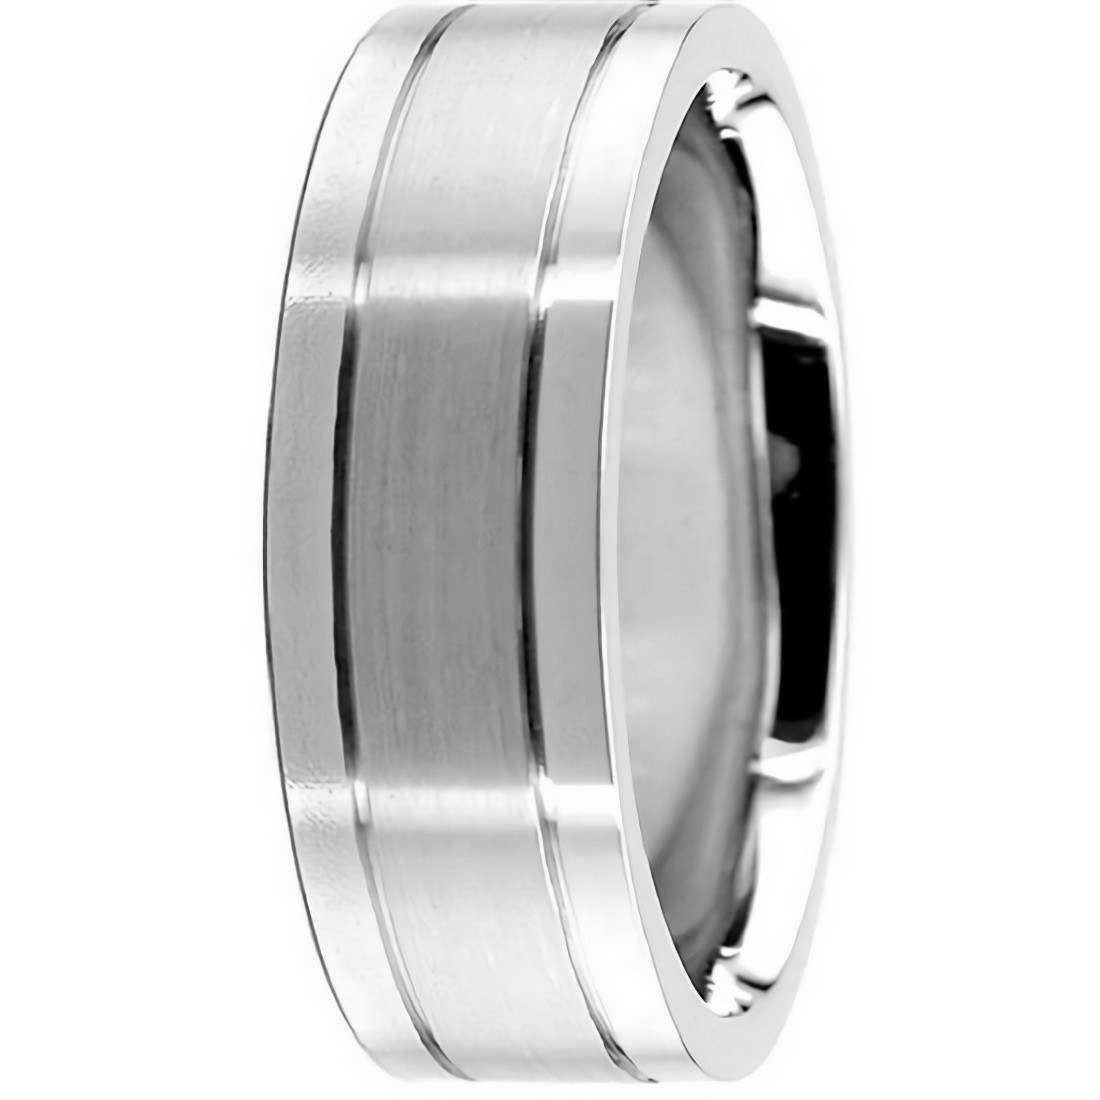 Solid 18k White Gold Wedding Ring Comfort Fit Band